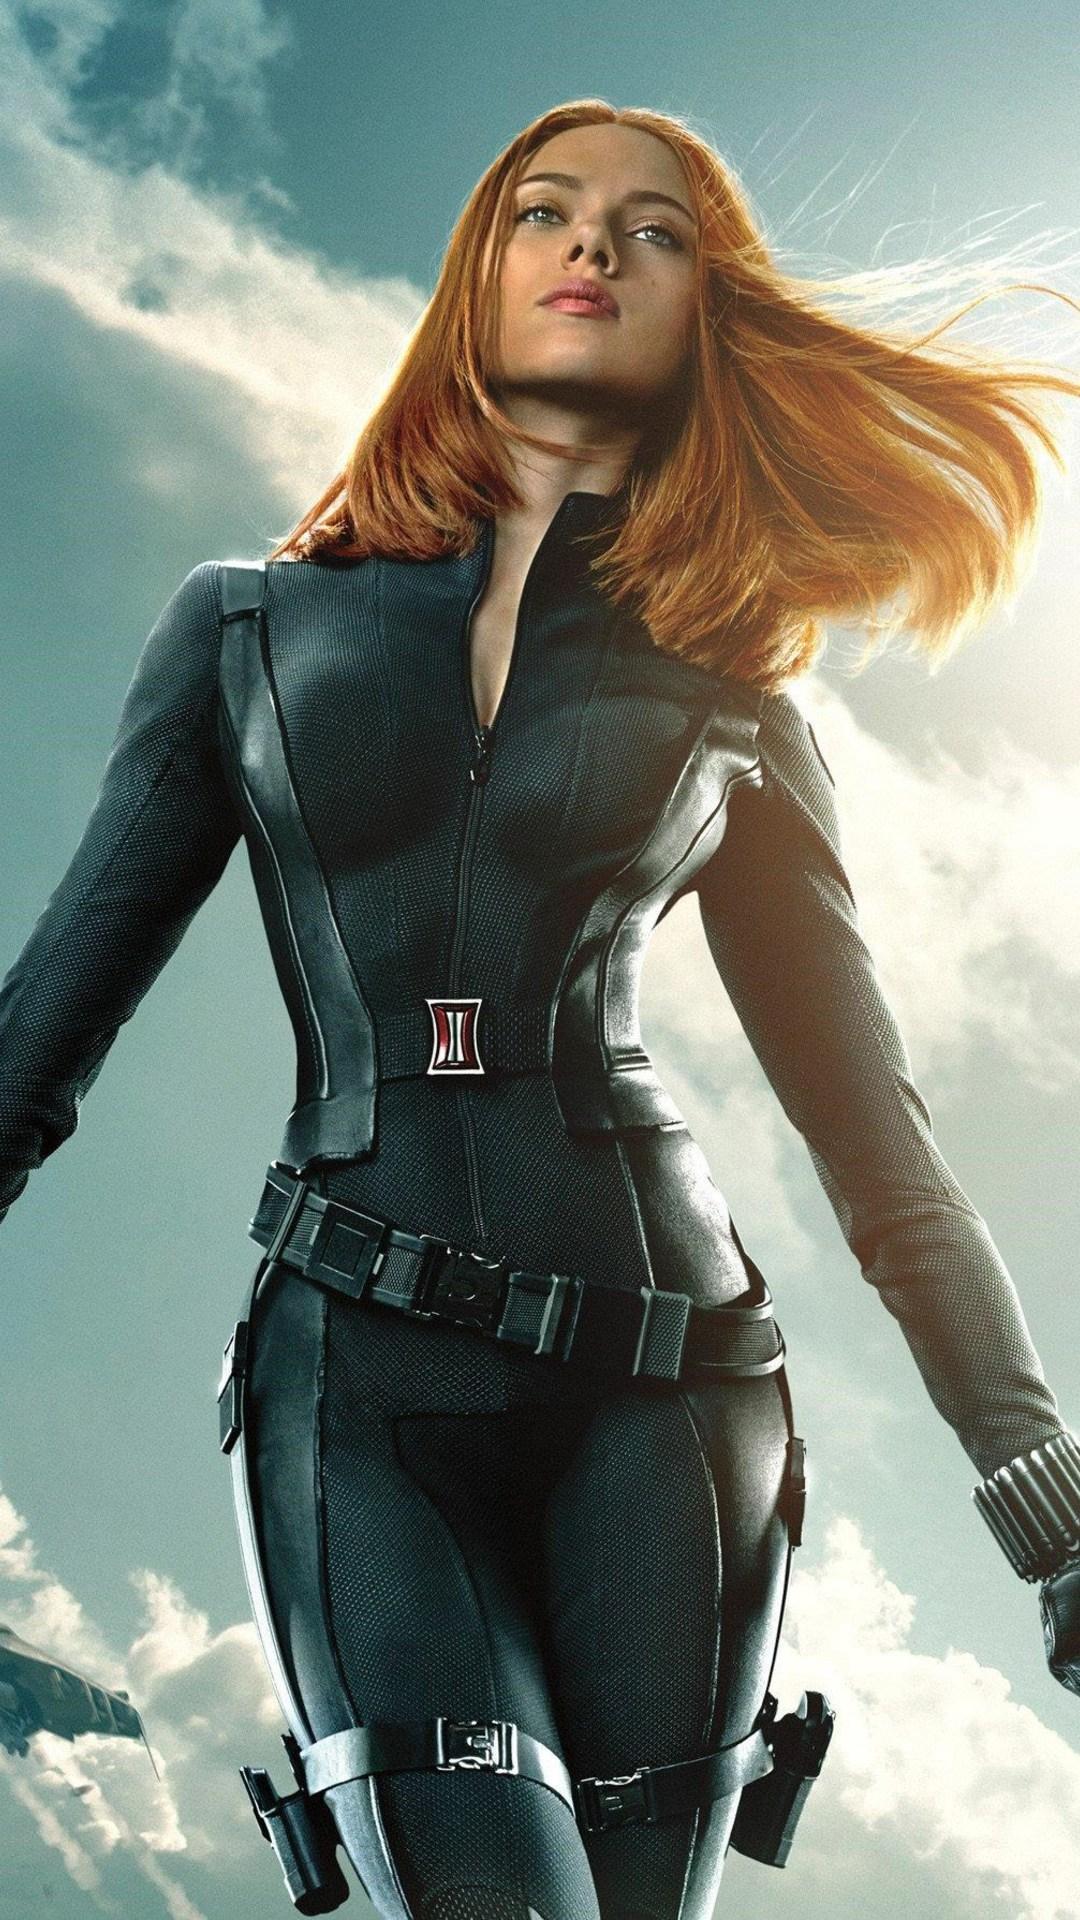 Black Widow 4K Wallpaper for Android